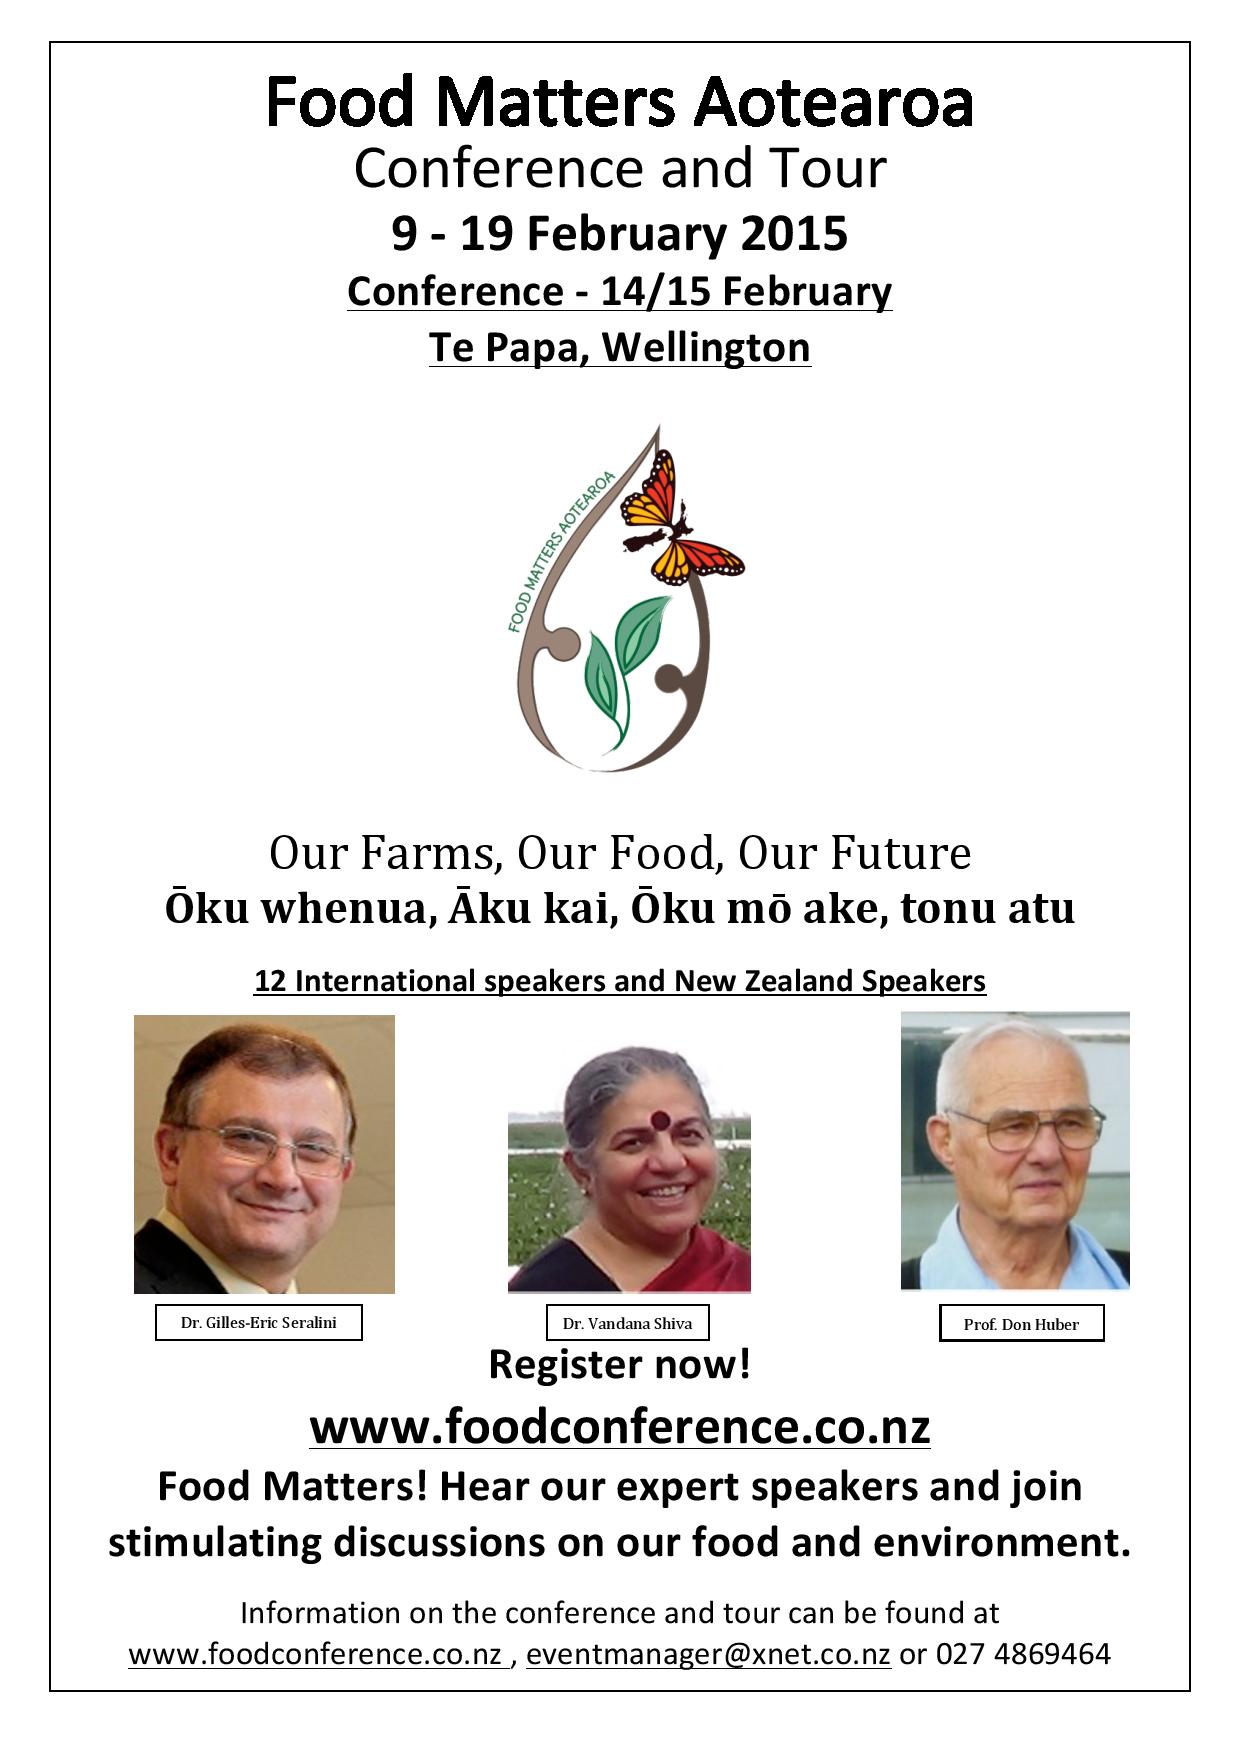 Food Matters Aotearoa Conference and Tour